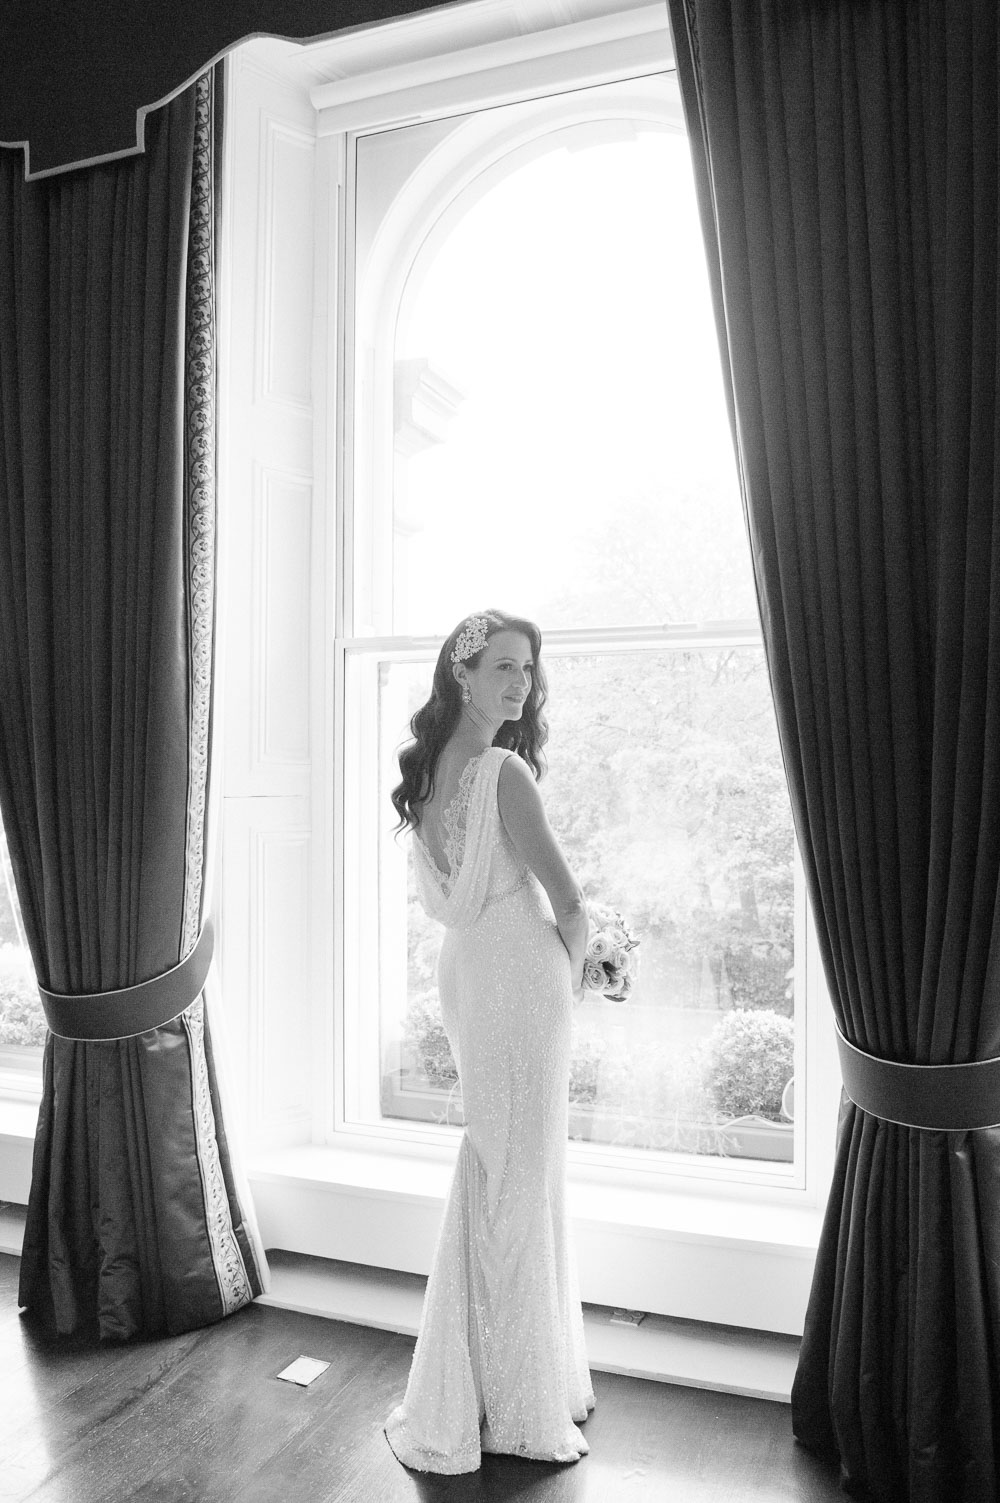 The bride poses for a bridal portrait by a window at The Shelbourne Hotel in Dublin